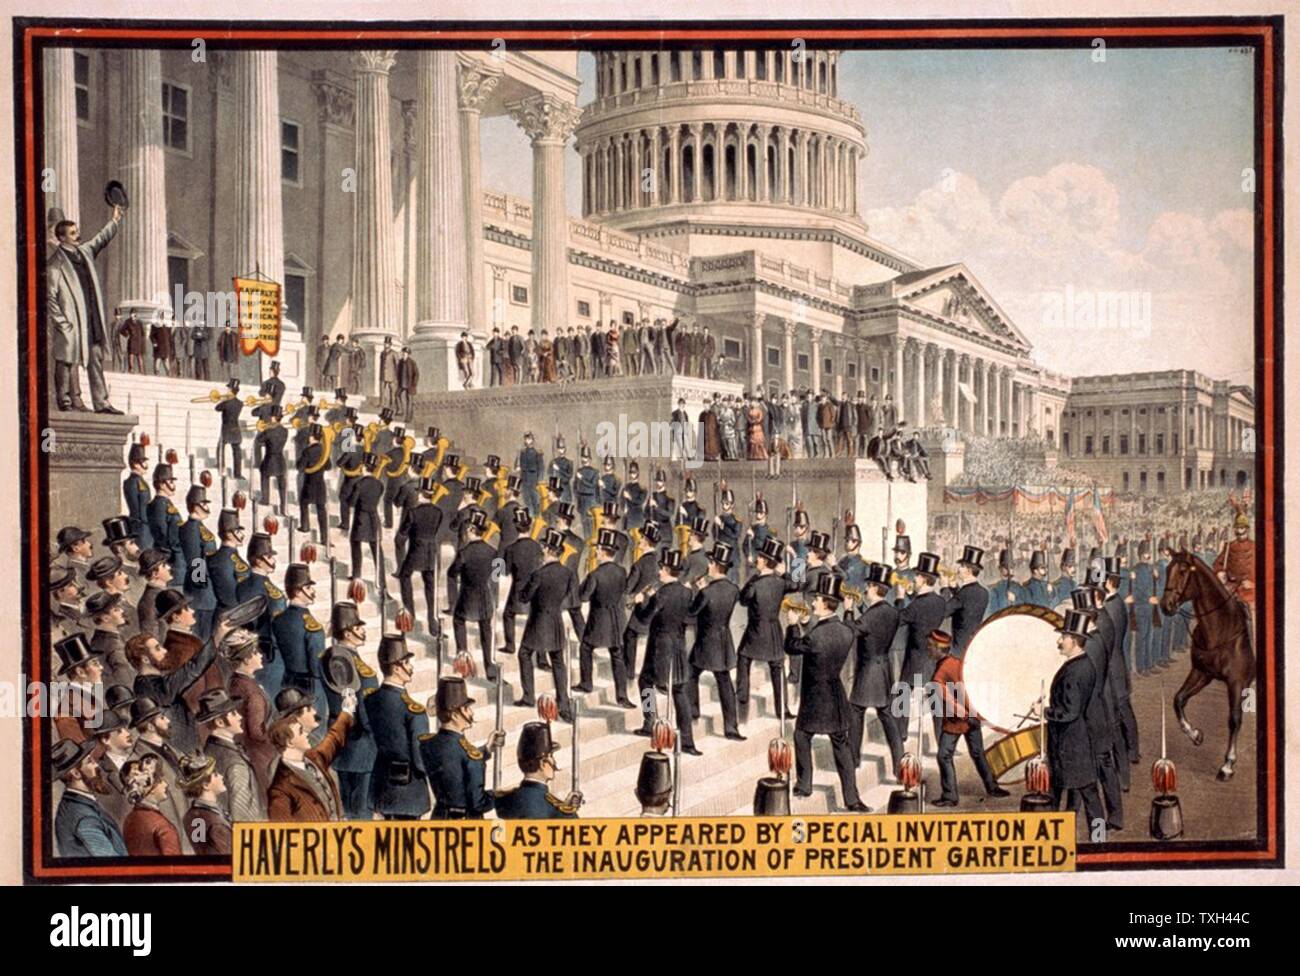 Haverley's Minstrels as they appeared by special invitation at the inauguration of President Garfield. The band ascending the steps of the Capitol building, Washington,  Chromolithograph Stock Photo